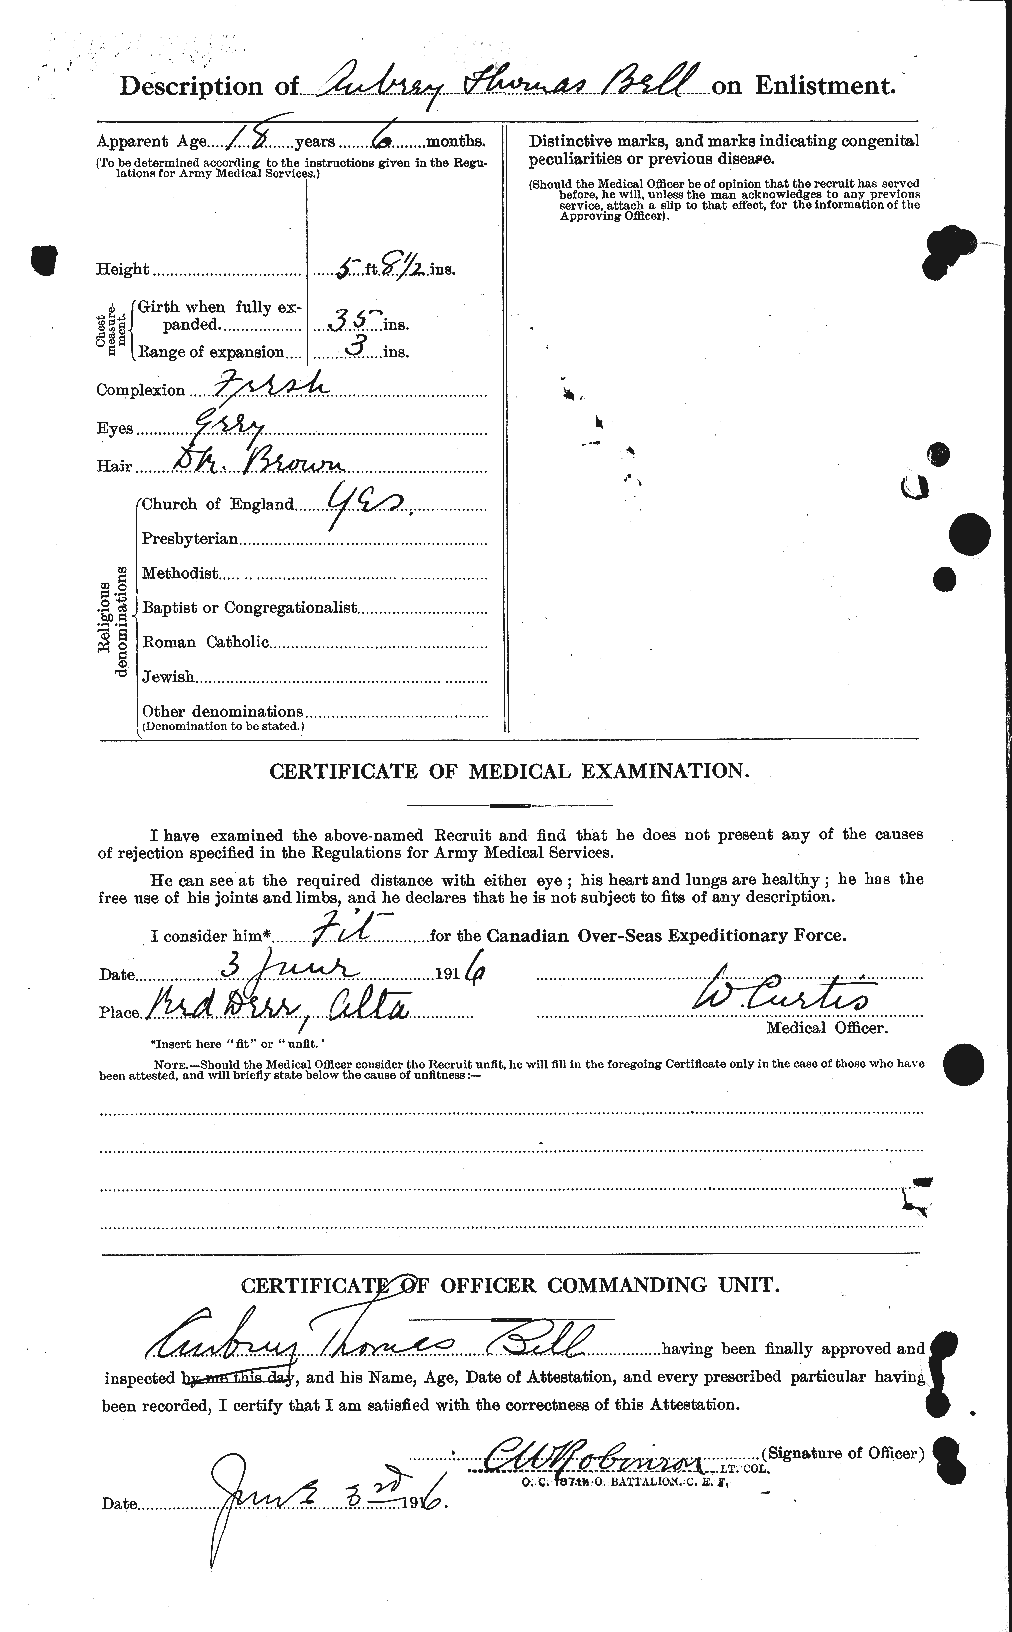 Personnel Records of the First World War - CEF 233900b